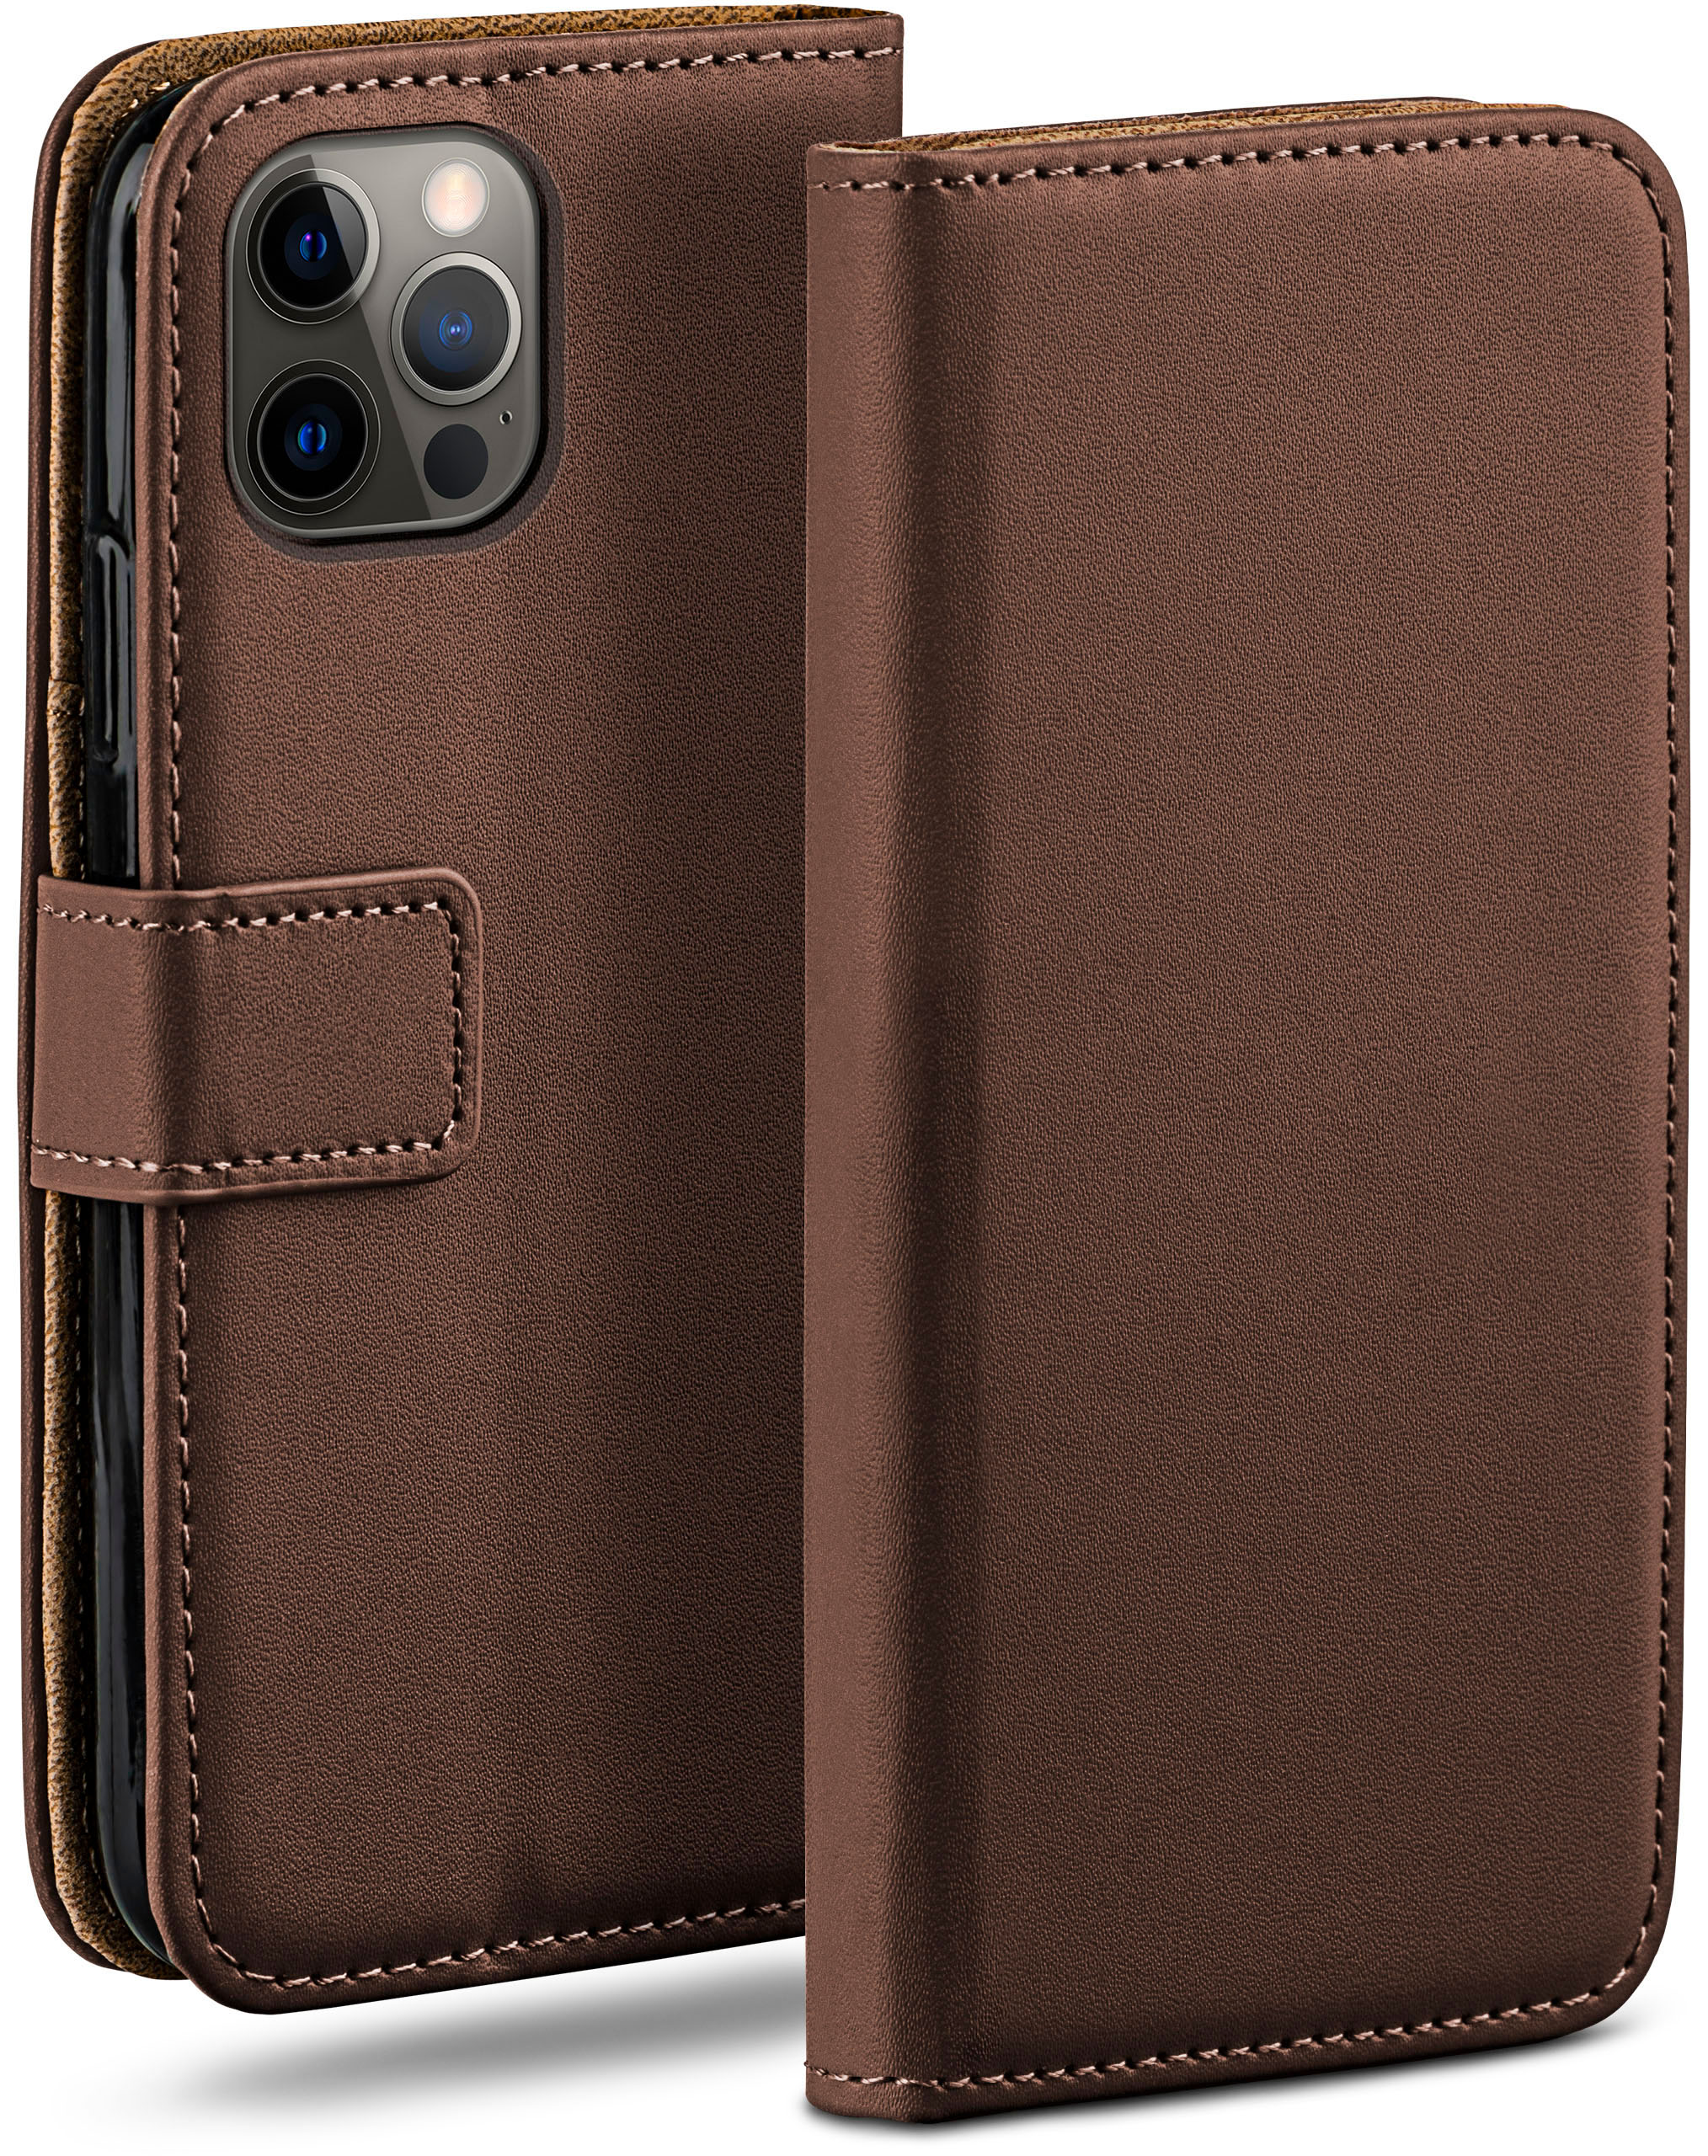 MOEX Book Case, 12 Apple, iPhone / Bookcover, Oxide-Brown Pro, 12